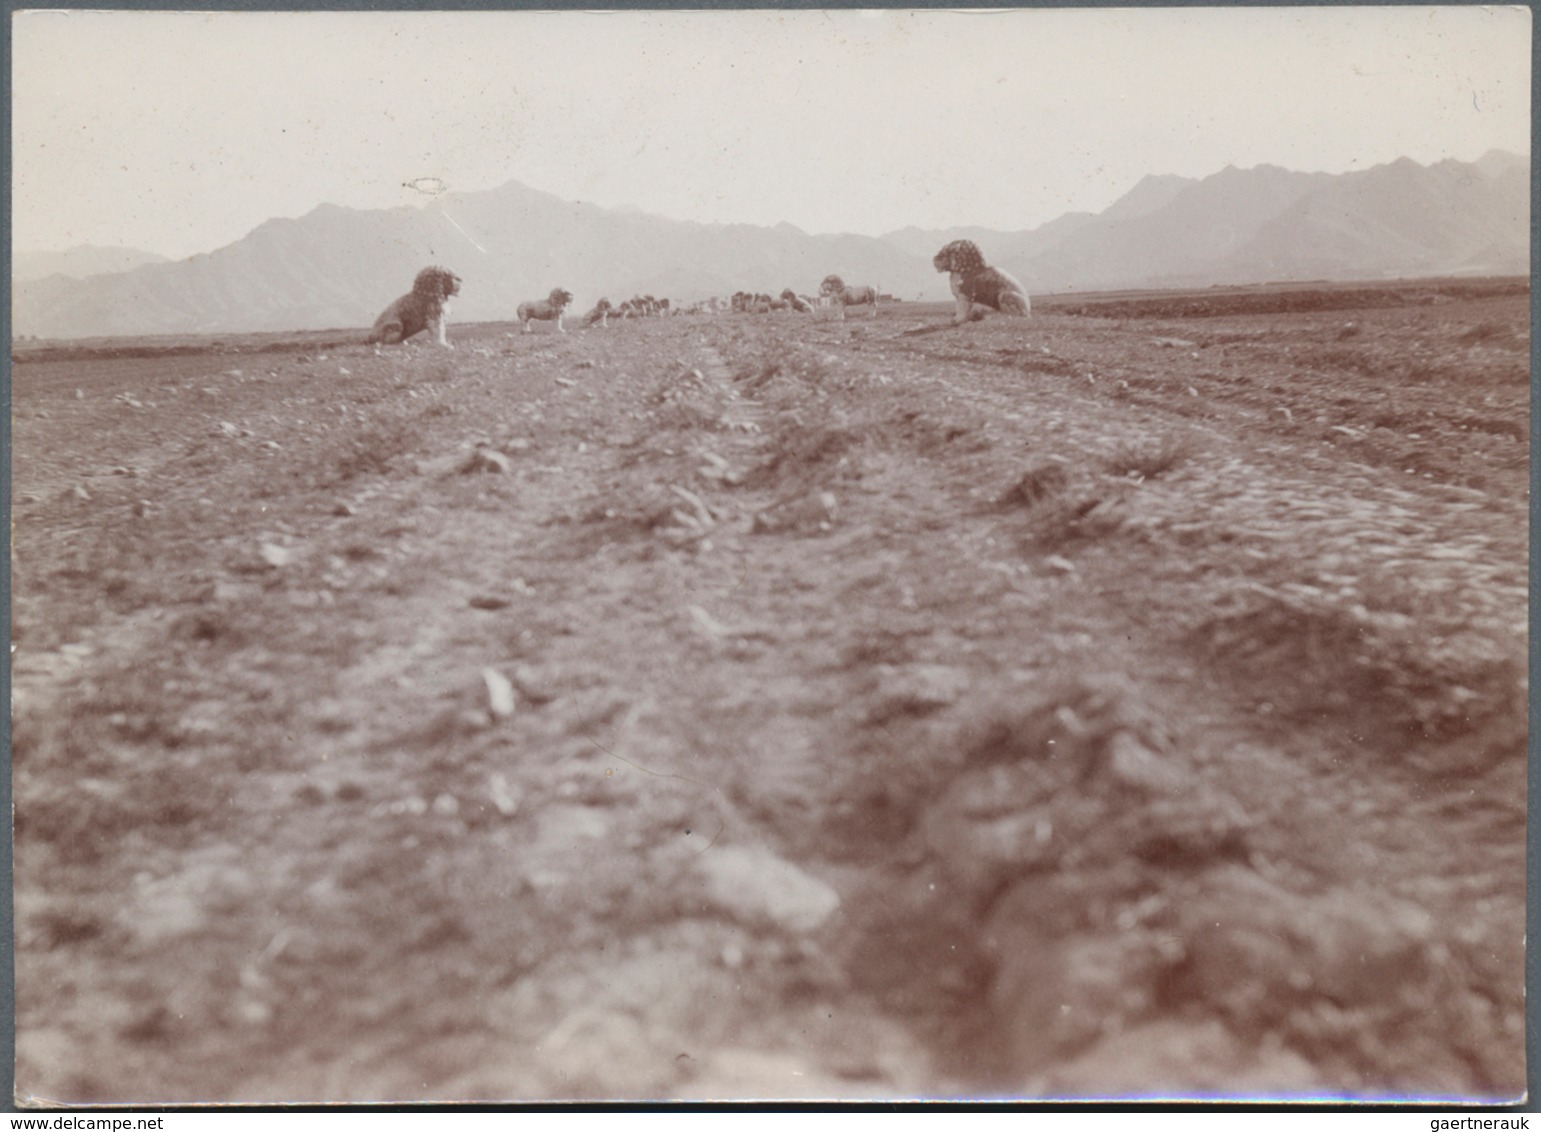 China: 1905/14 (ca.), 21 privately take photographs of Nanking and surroundings inc. Ming burials or